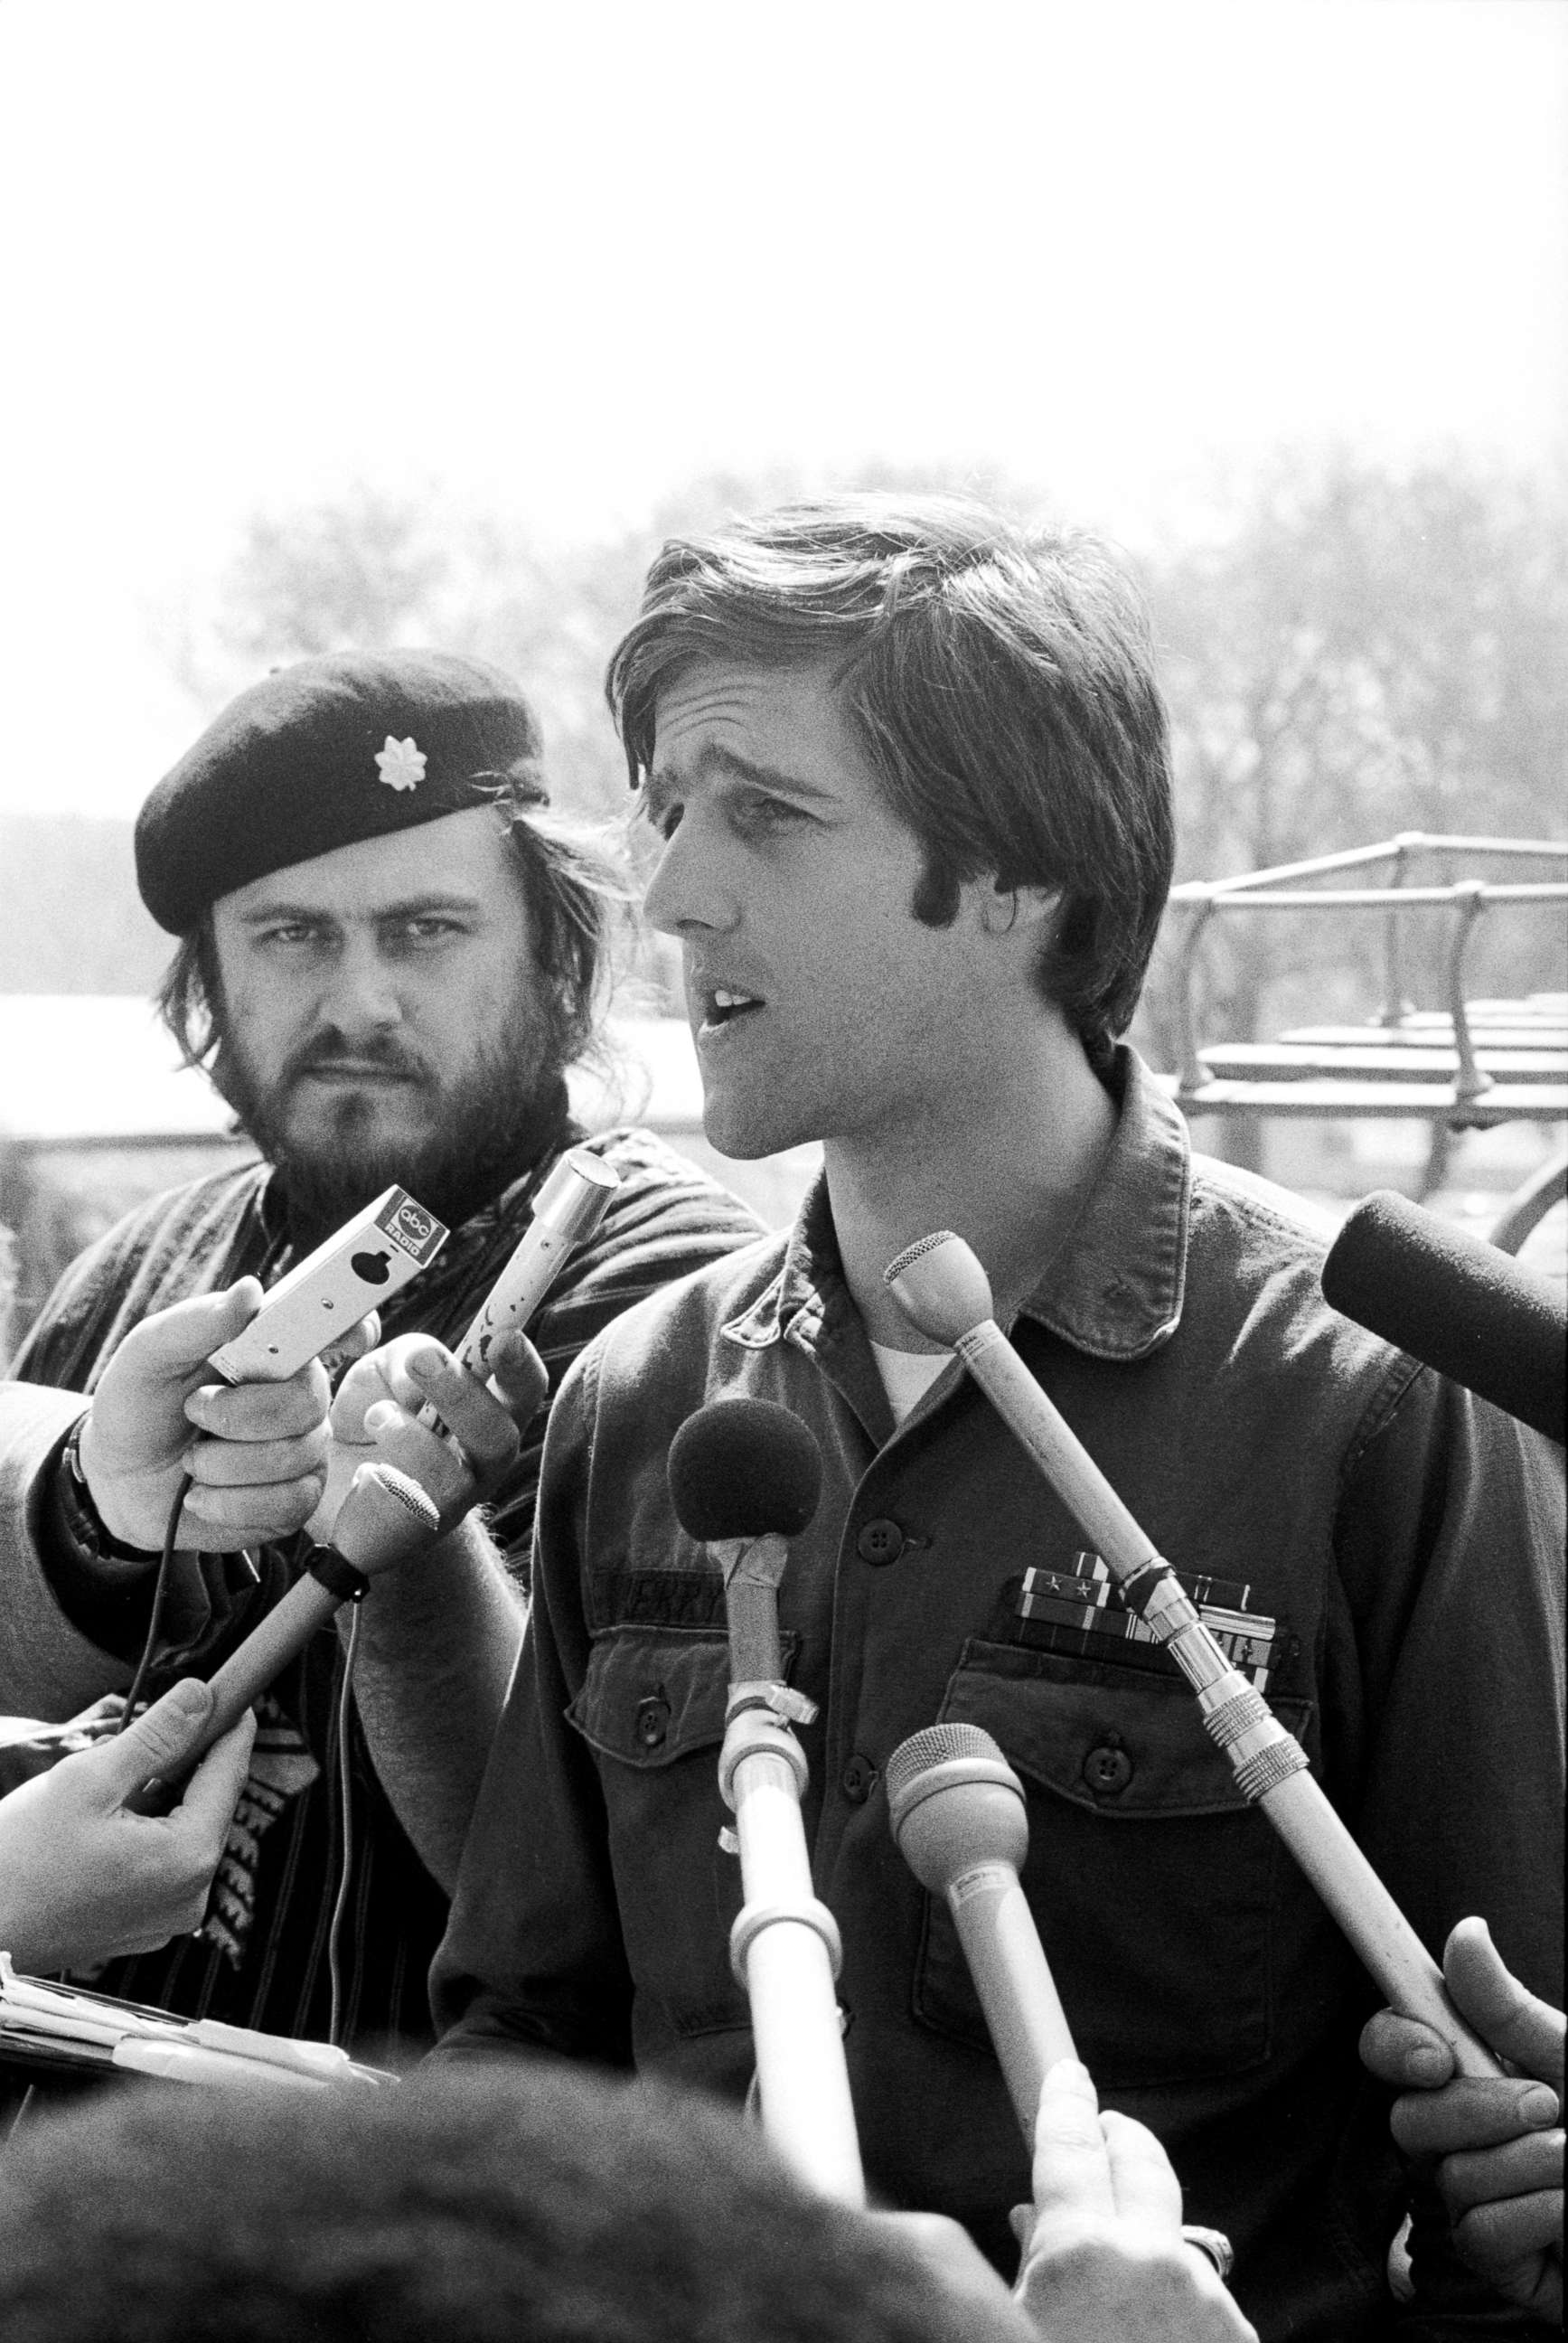 PHOTO: American soldier John Kerry, spokesman for the VVAW (Vietnam Veterans Against the War), speaks to the press at an outdoor event in Washington D.C., April 21, 1971. 